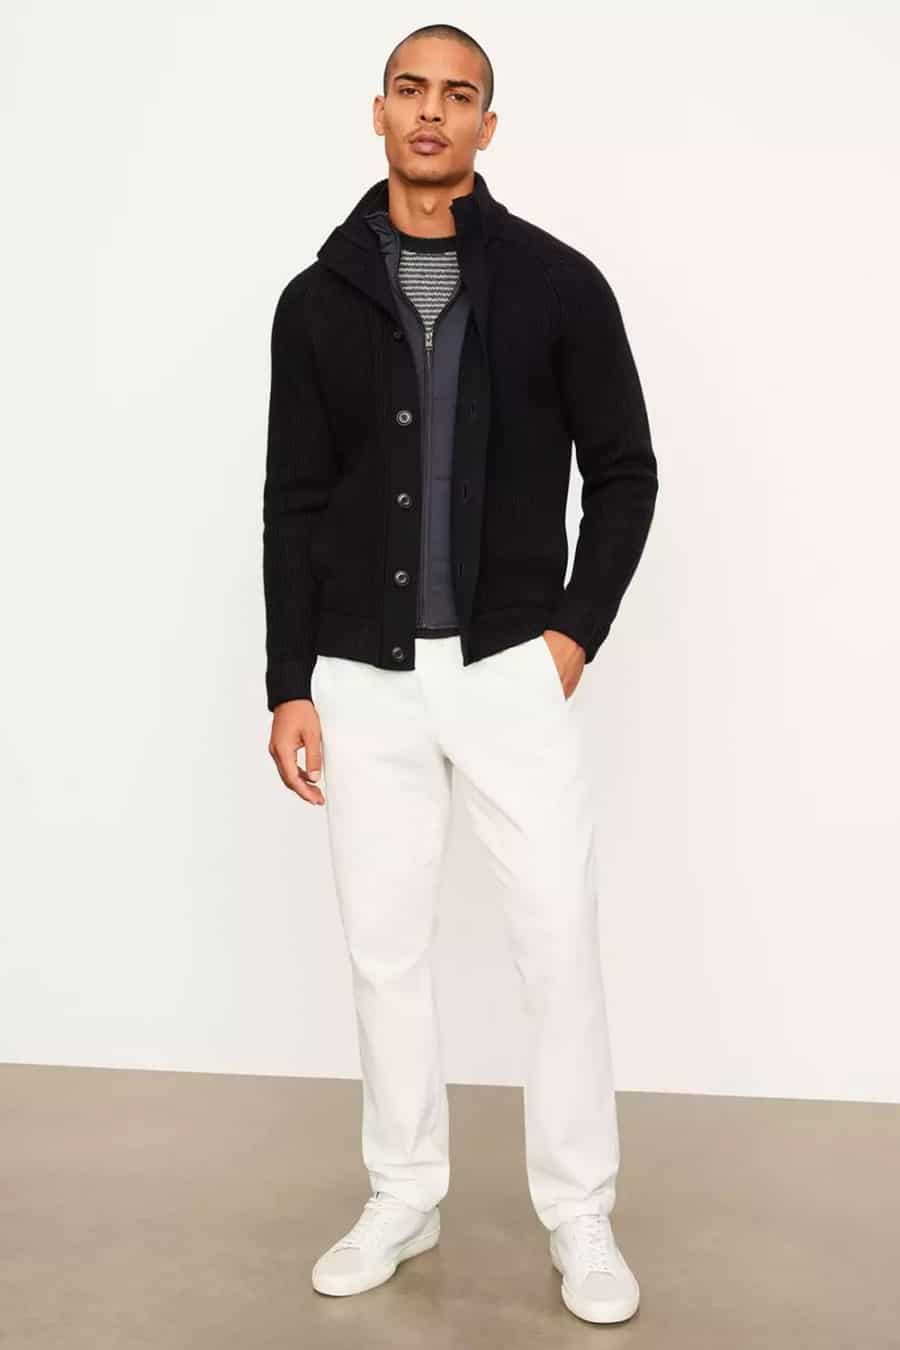 Men's white pants, black bodywarmer, black chunky knit cardigan and white sneakers outfit